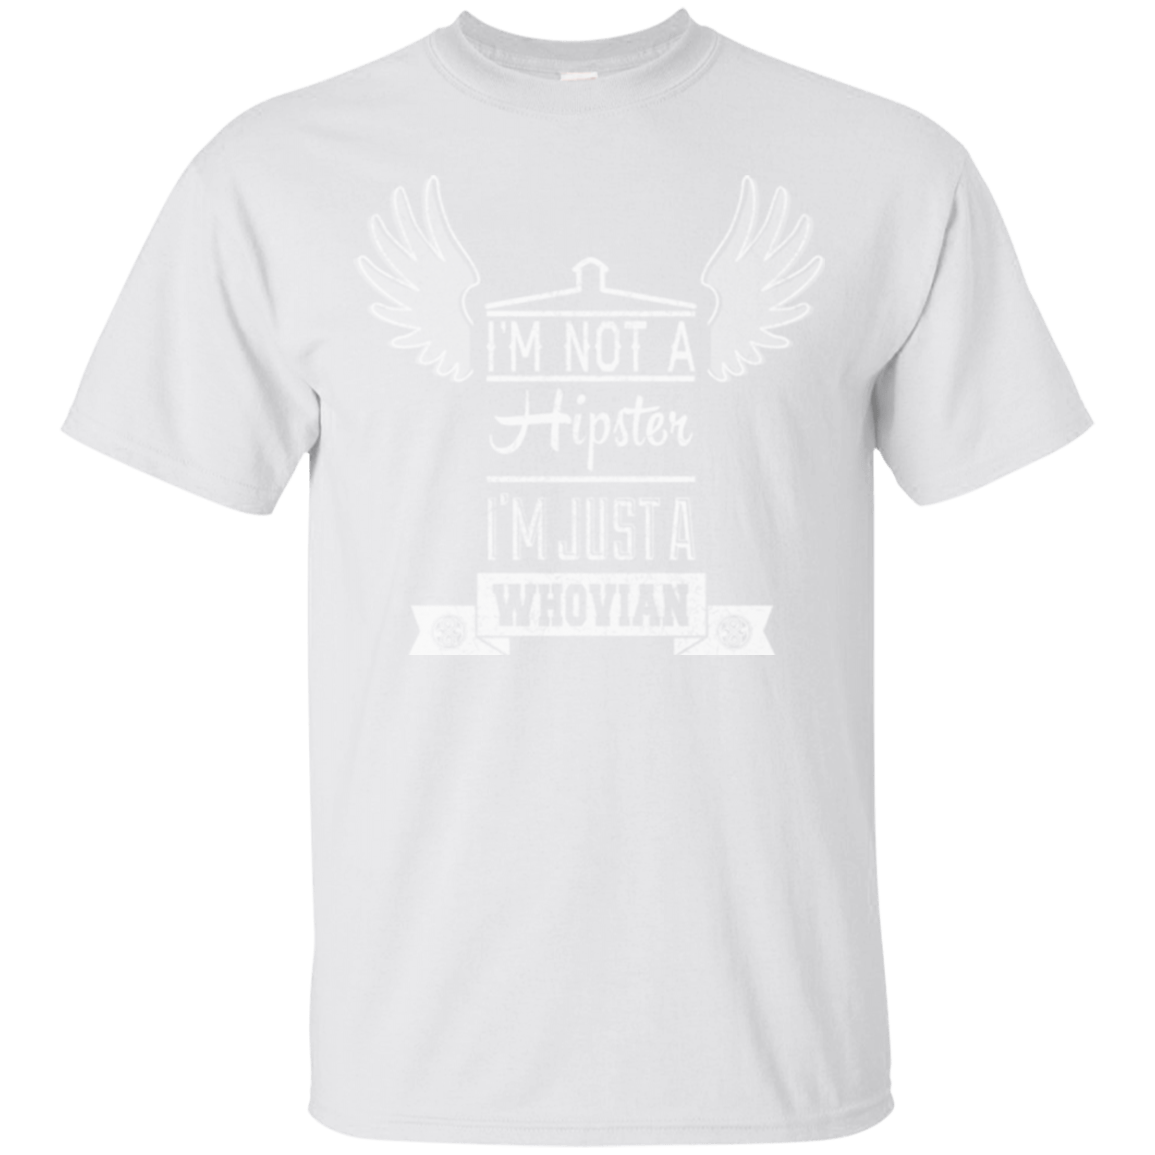 T-Shirts White / Small Whovian Hipster T-Shirt